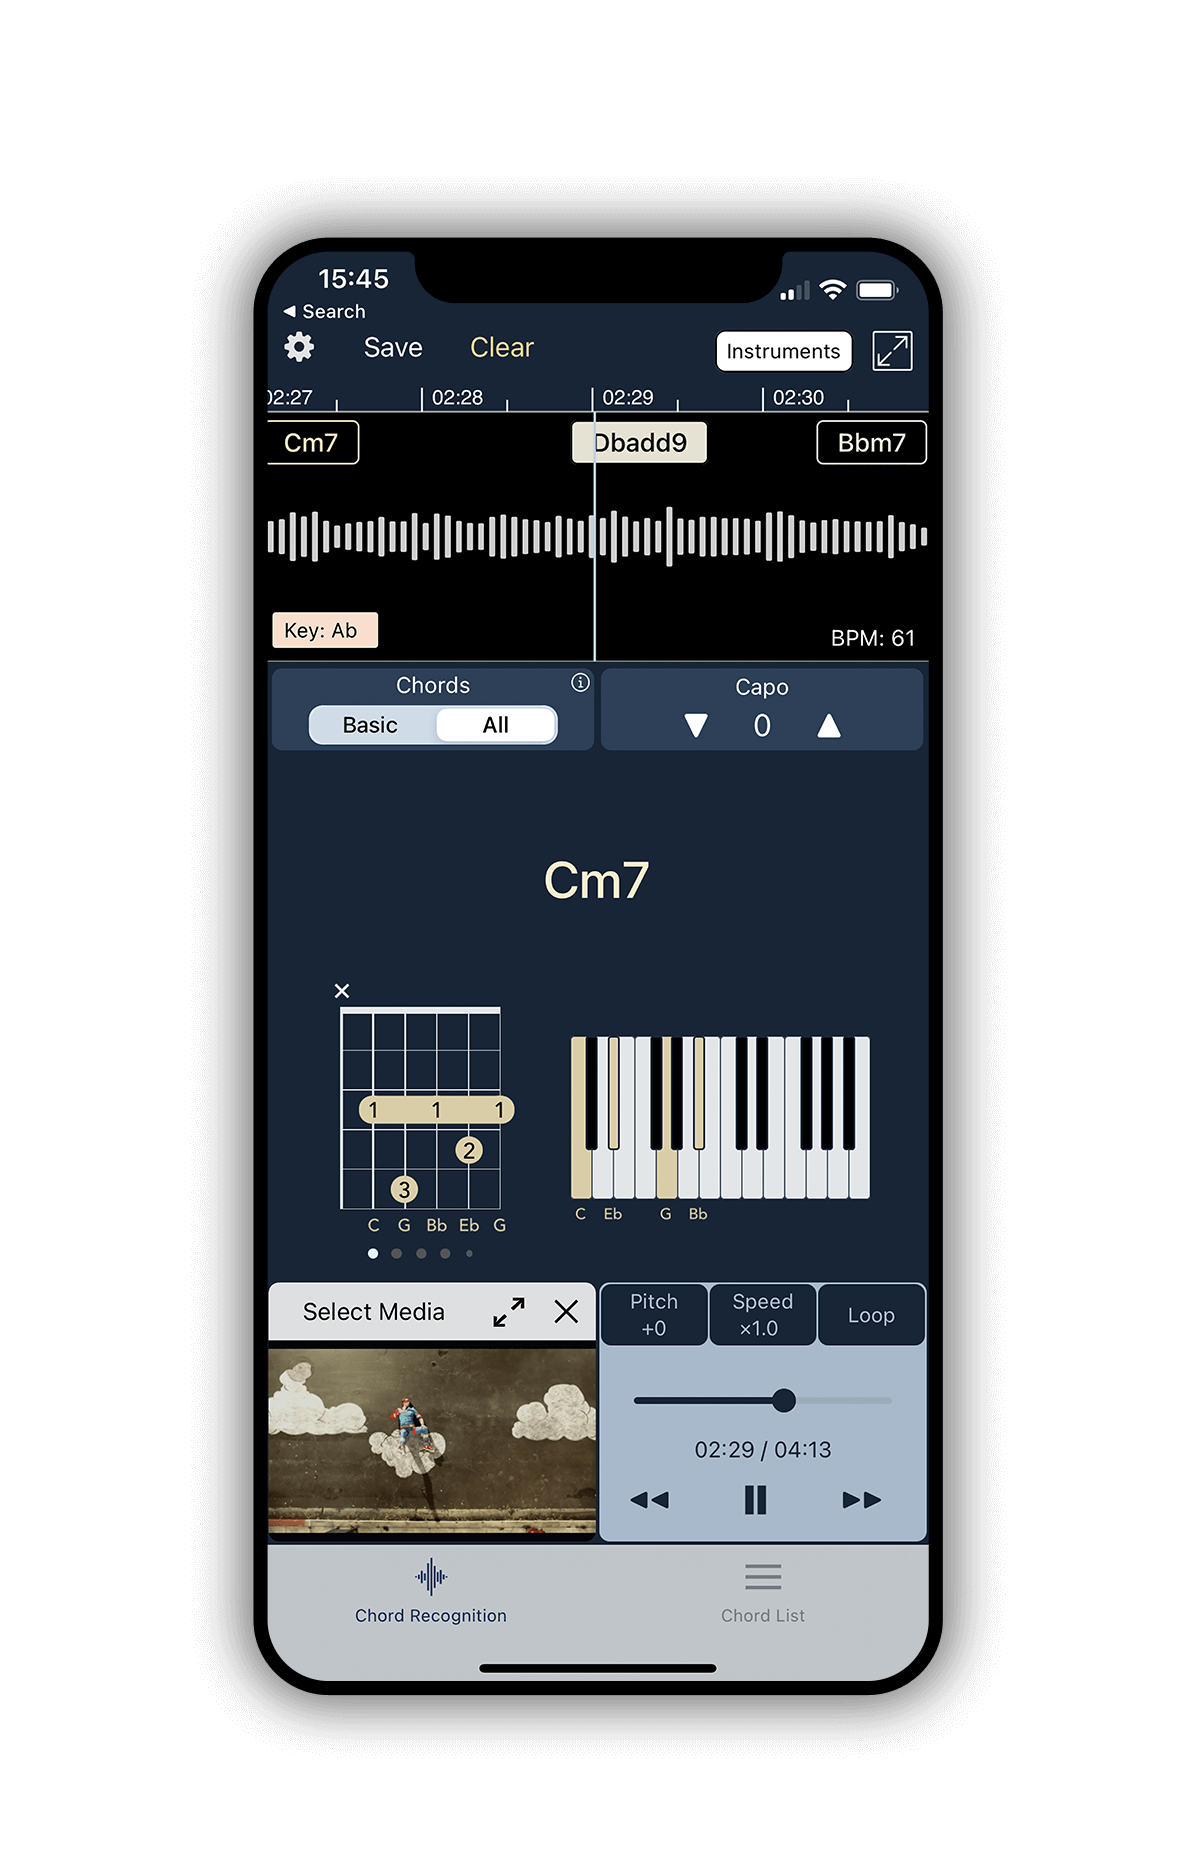 Chord Ai – Chords And Beats For Any Song!